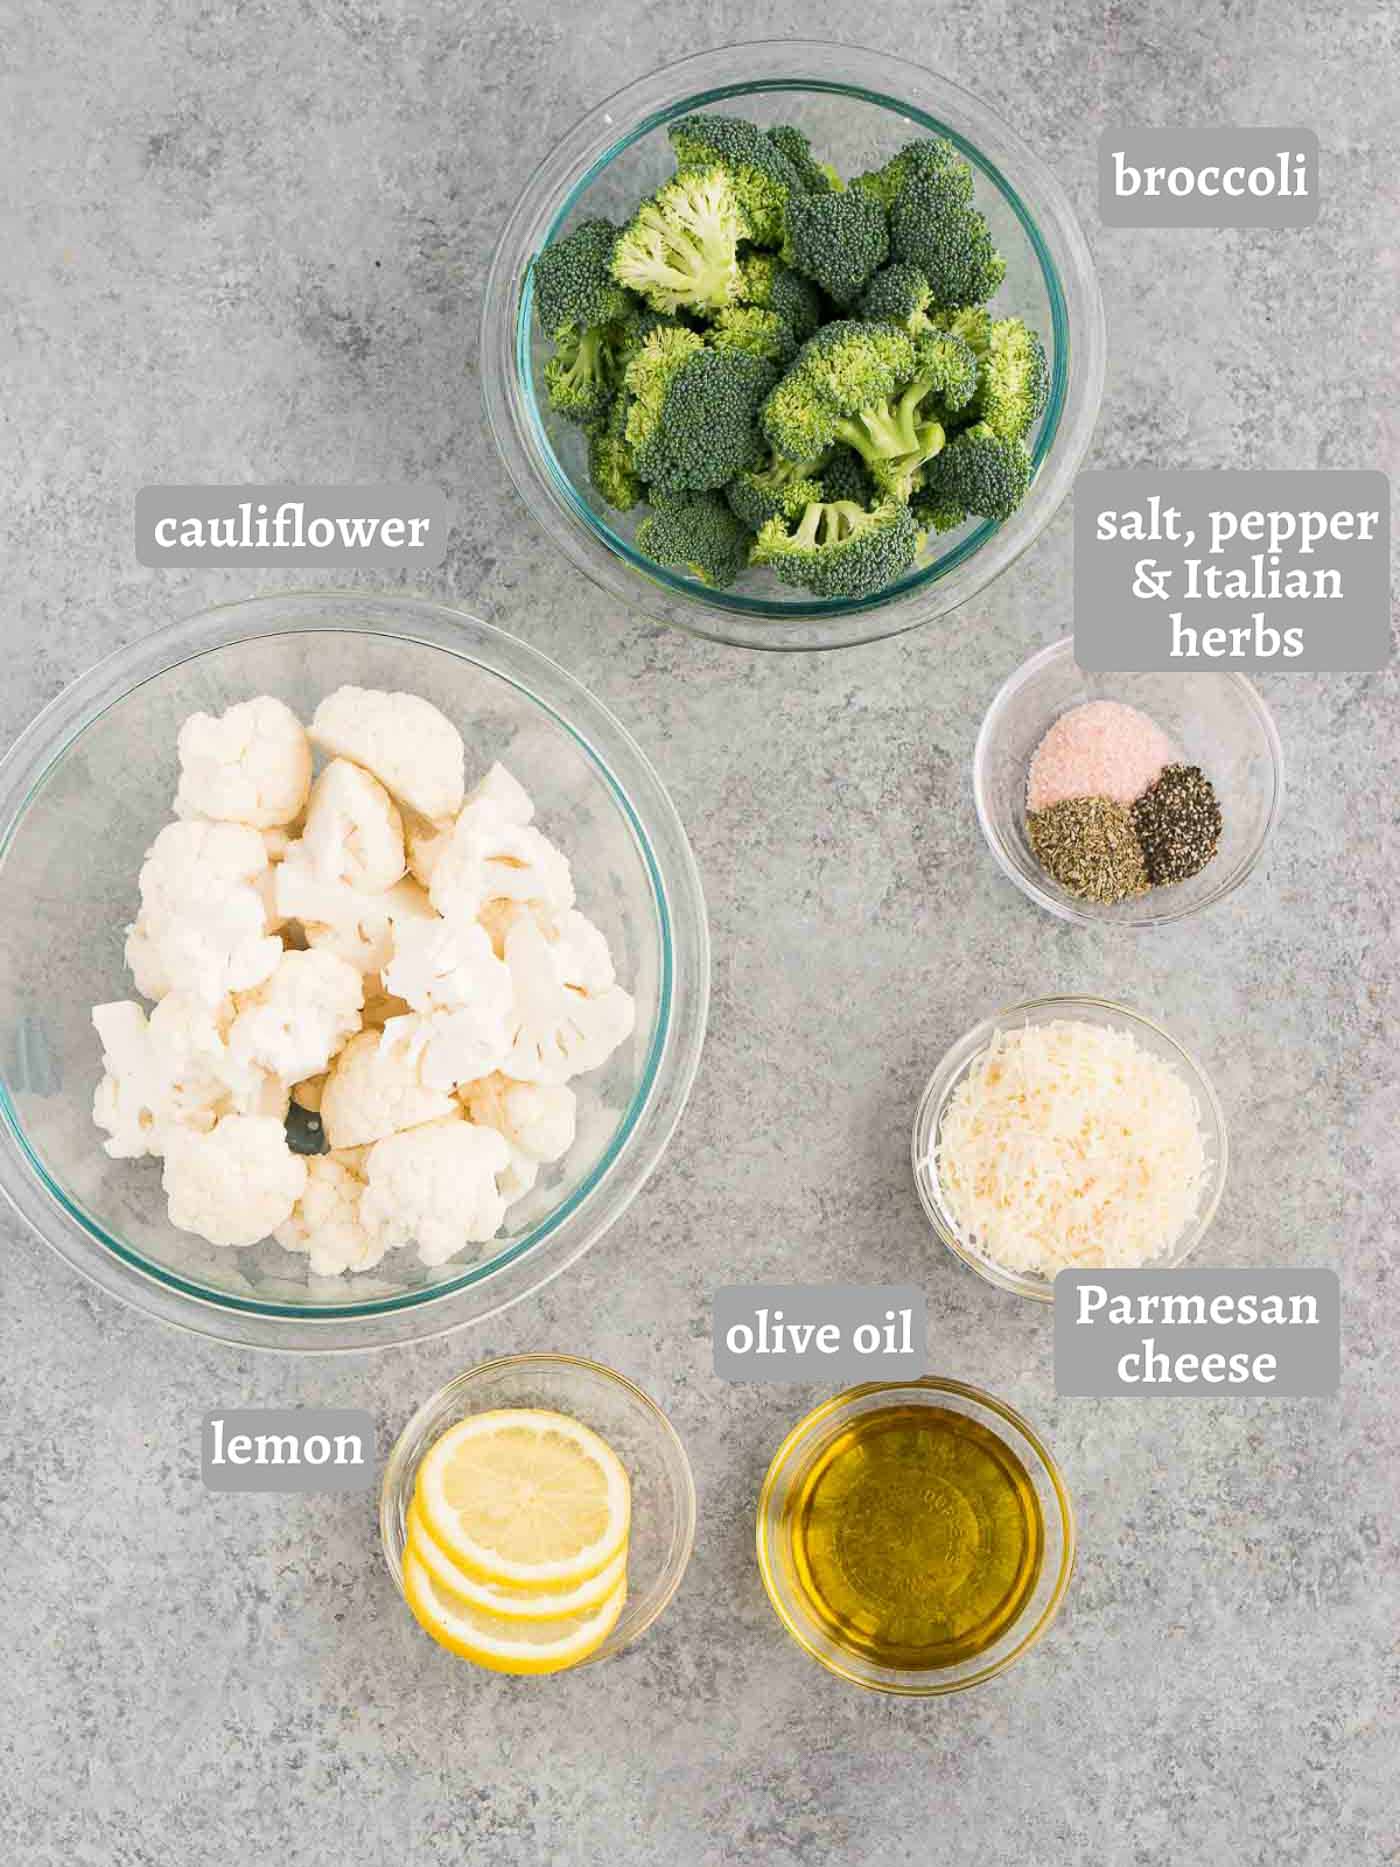 ingredients for roasted broccoli and cauliflower